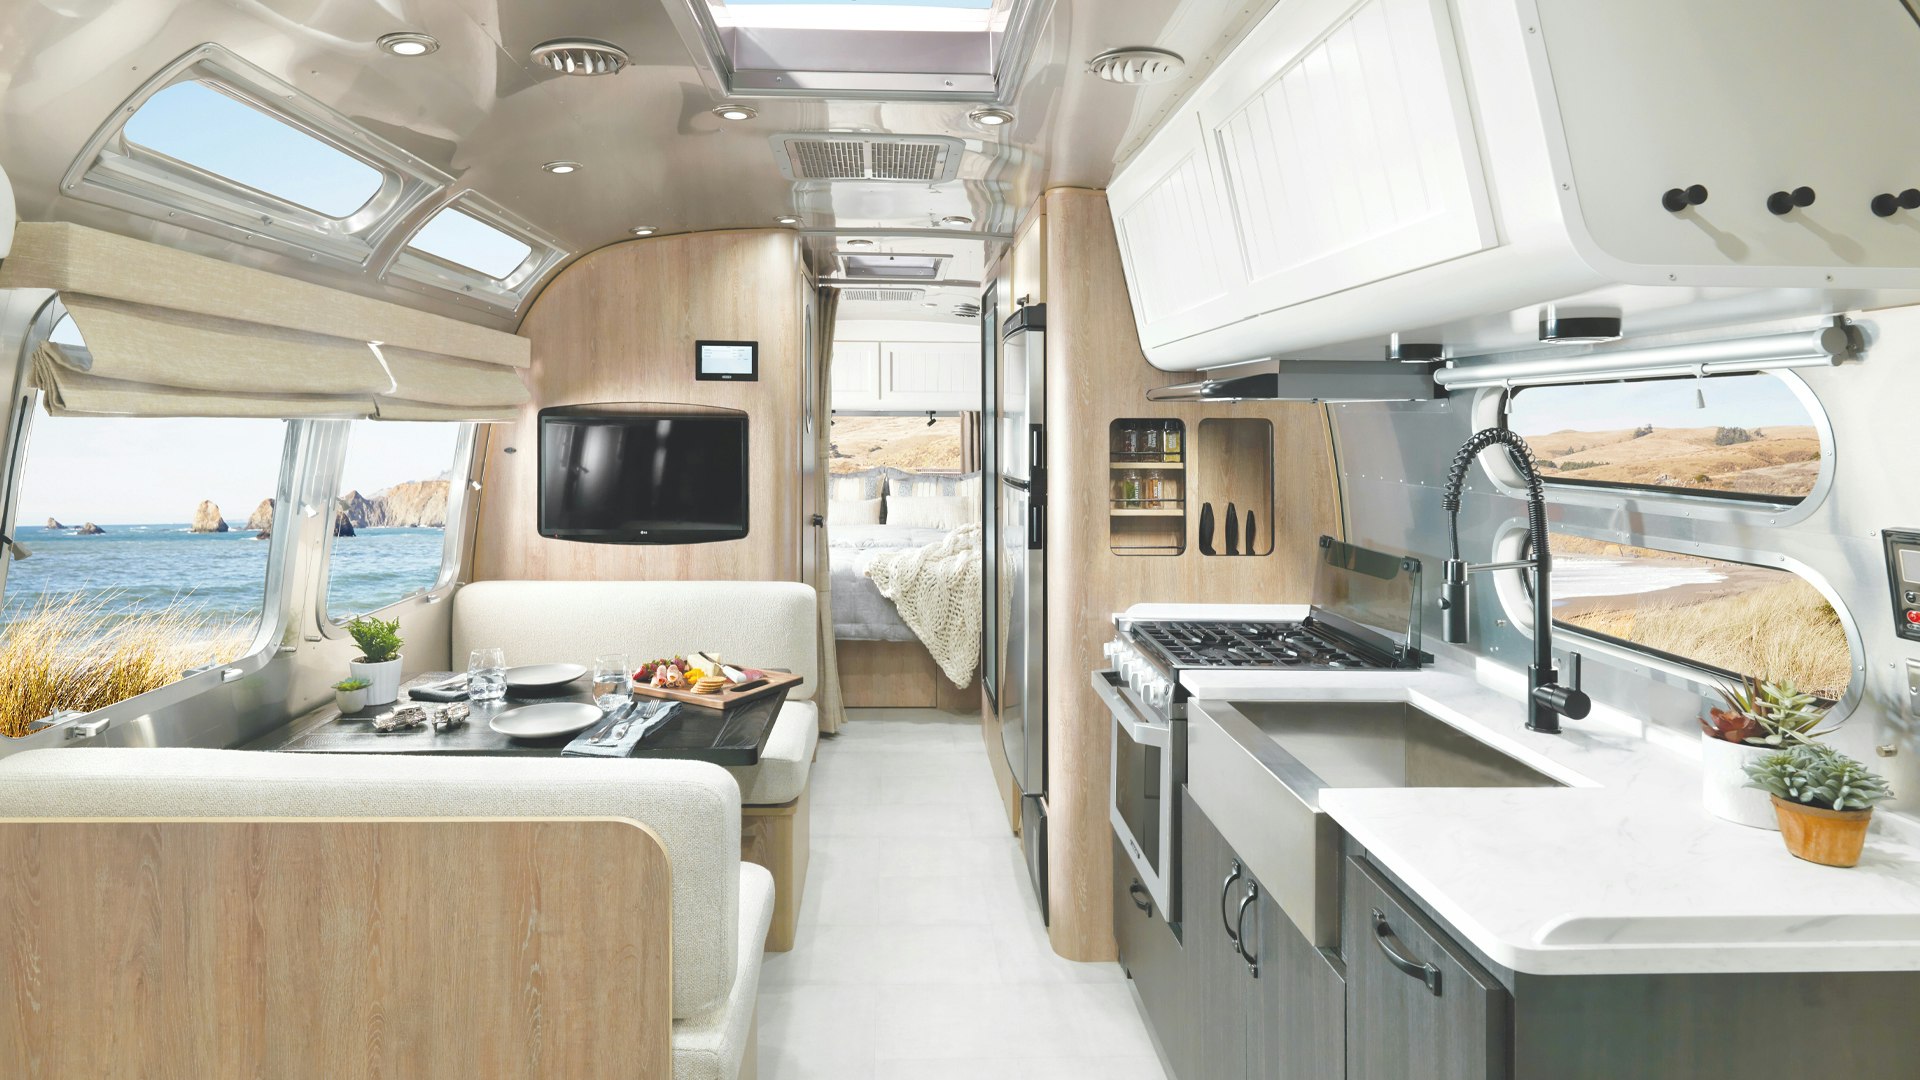 Airstream Pottery Barn Special Edition Travel Trailer interior image of dining space, kitchen, and bedroom